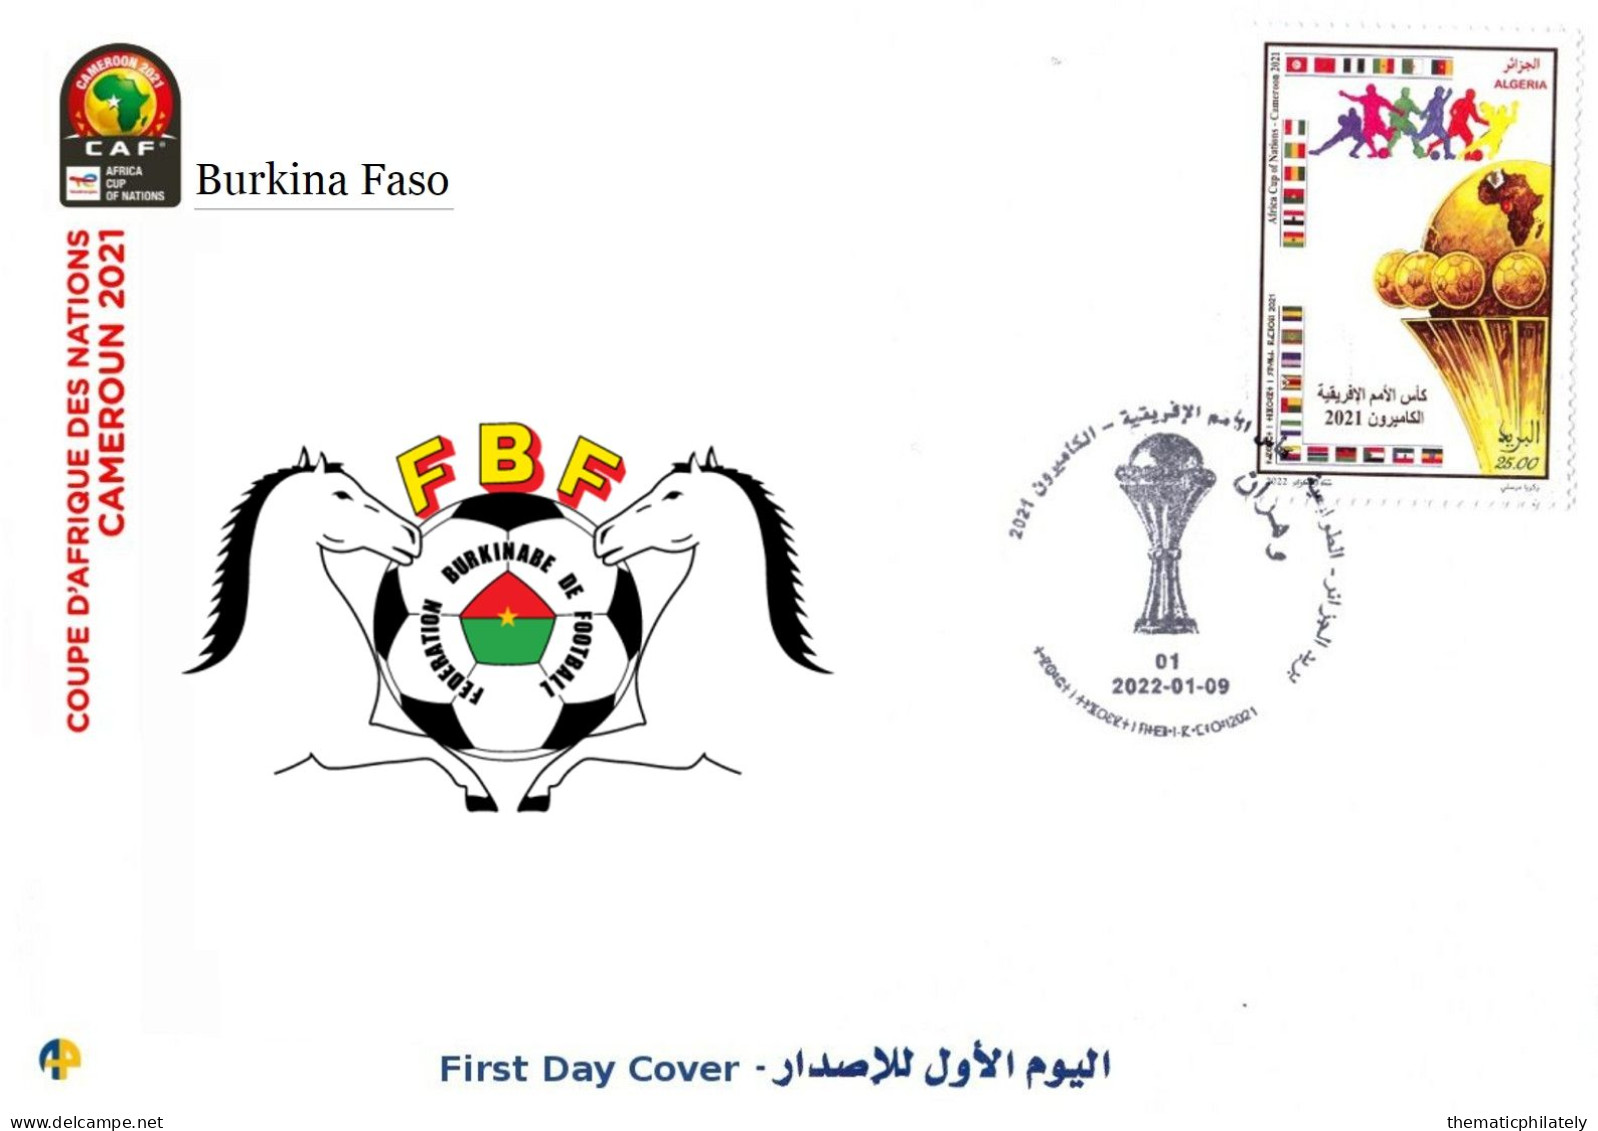 Algeria FDC 1888 Coupe D'Afrique Des Nations Football 2021 Africa Cup Of Nations Soccer CAF Burkina Faso - Africa Cup Of Nations